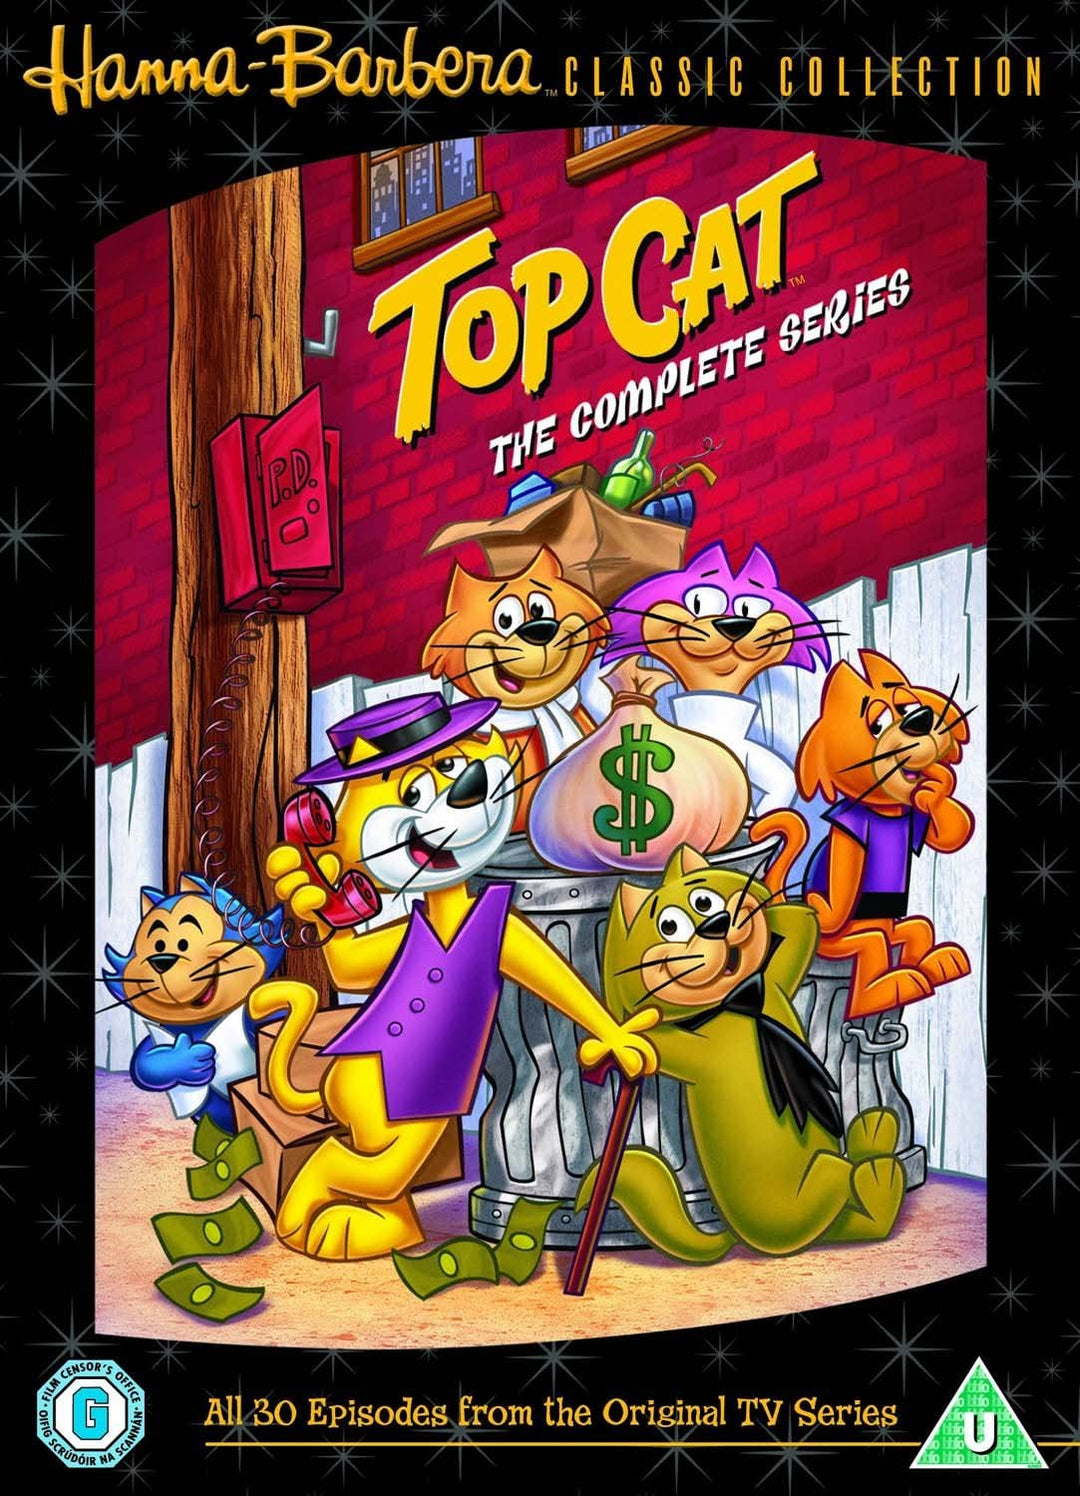 Top Cat: The Complete Series - Kids & Family [DVD]